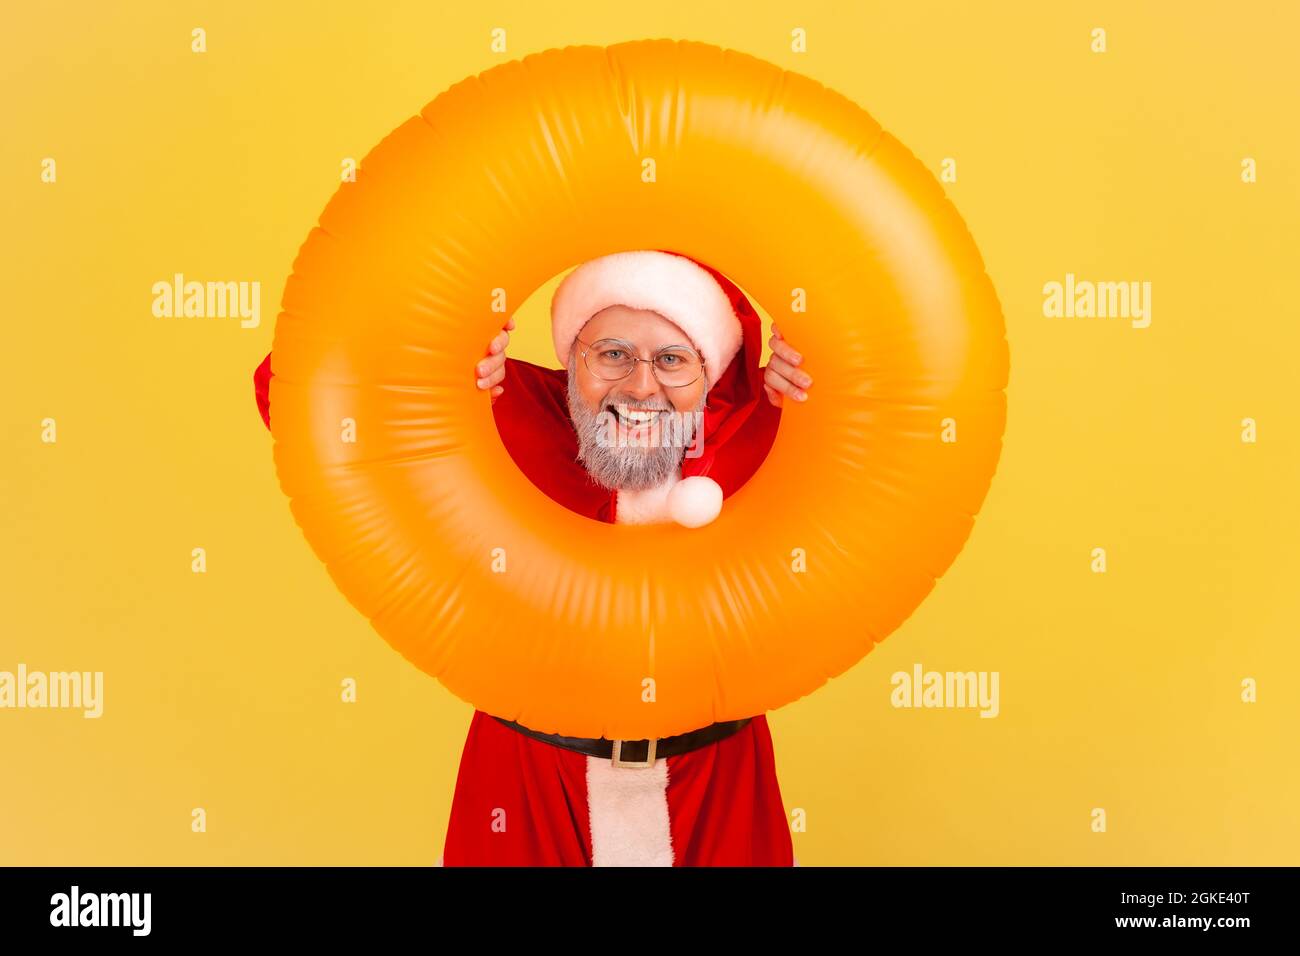 Smiling elderly man with gray beard in santa claus costume holding orange rubber ring in hands, looking at camera with happy expression, winter tour. Stock Photo